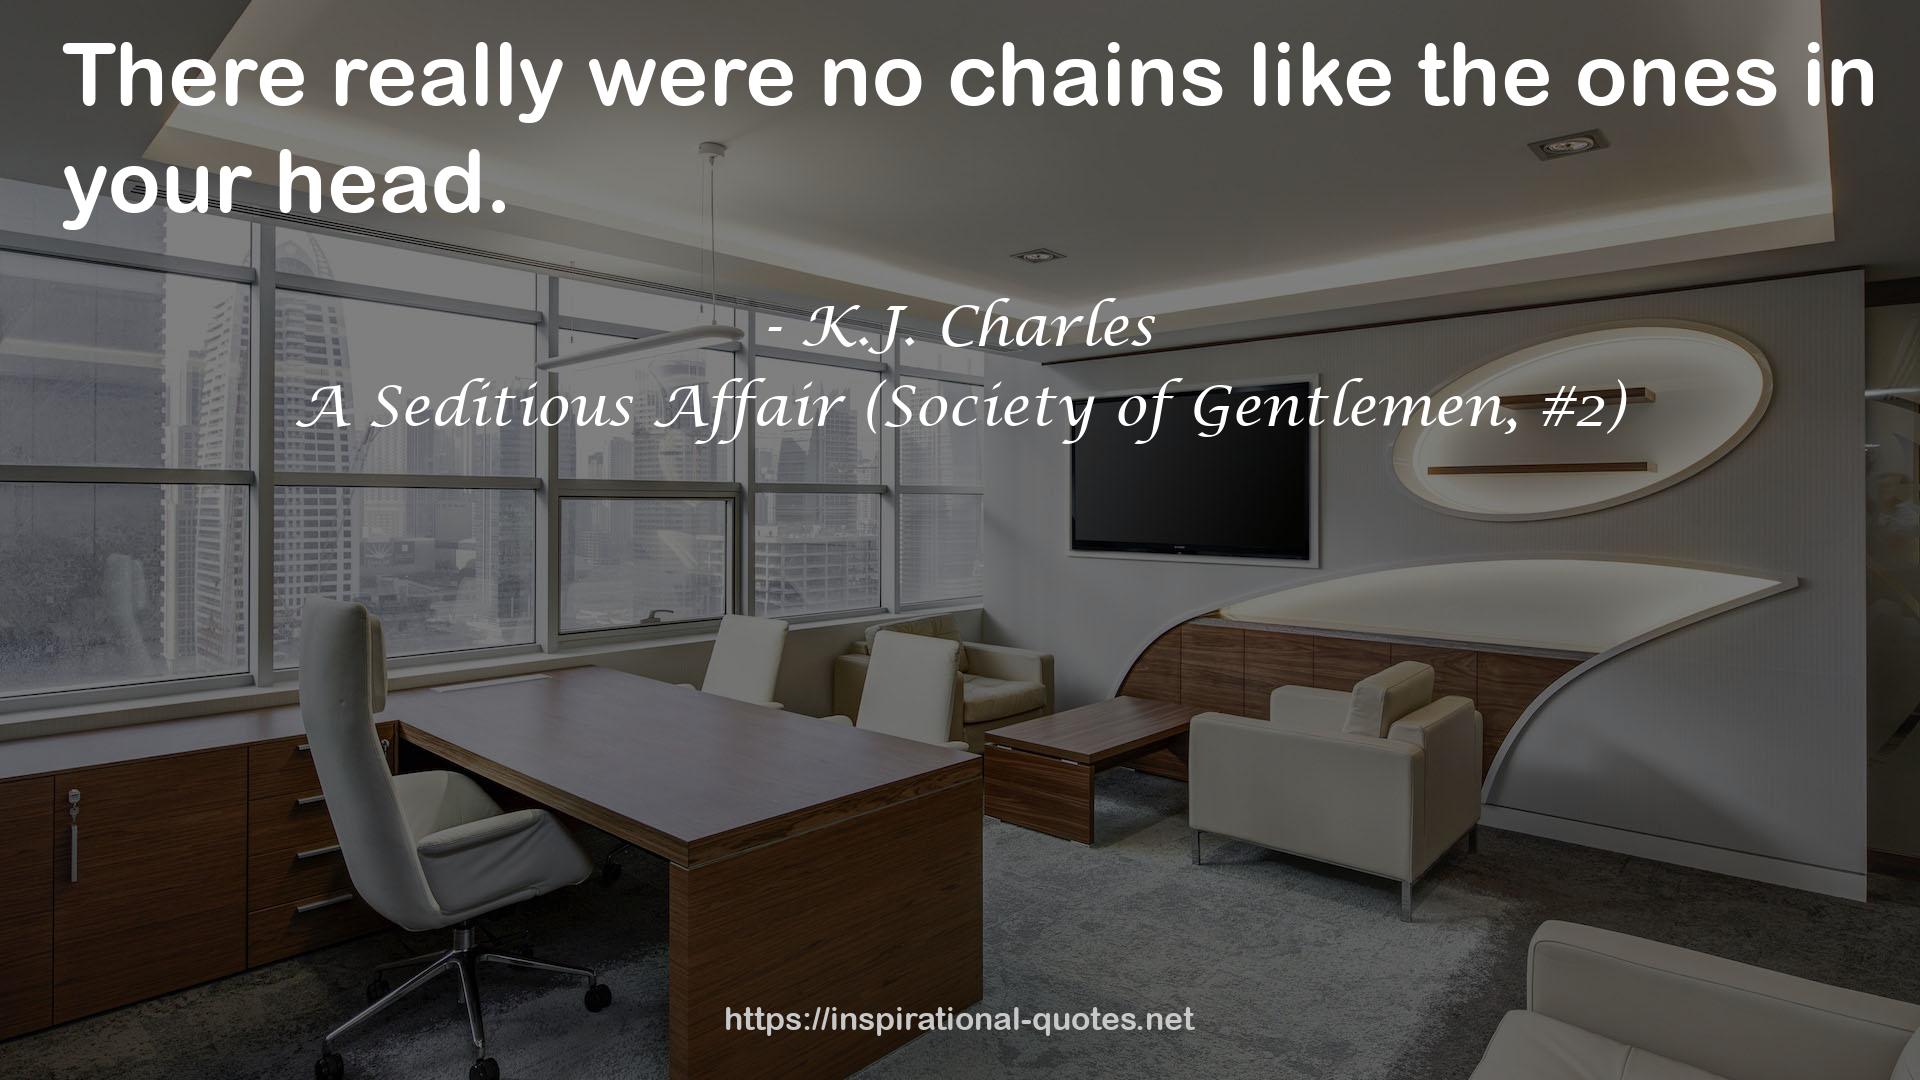 A Seditious Affair (Society of Gentlemen, #2) QUOTES